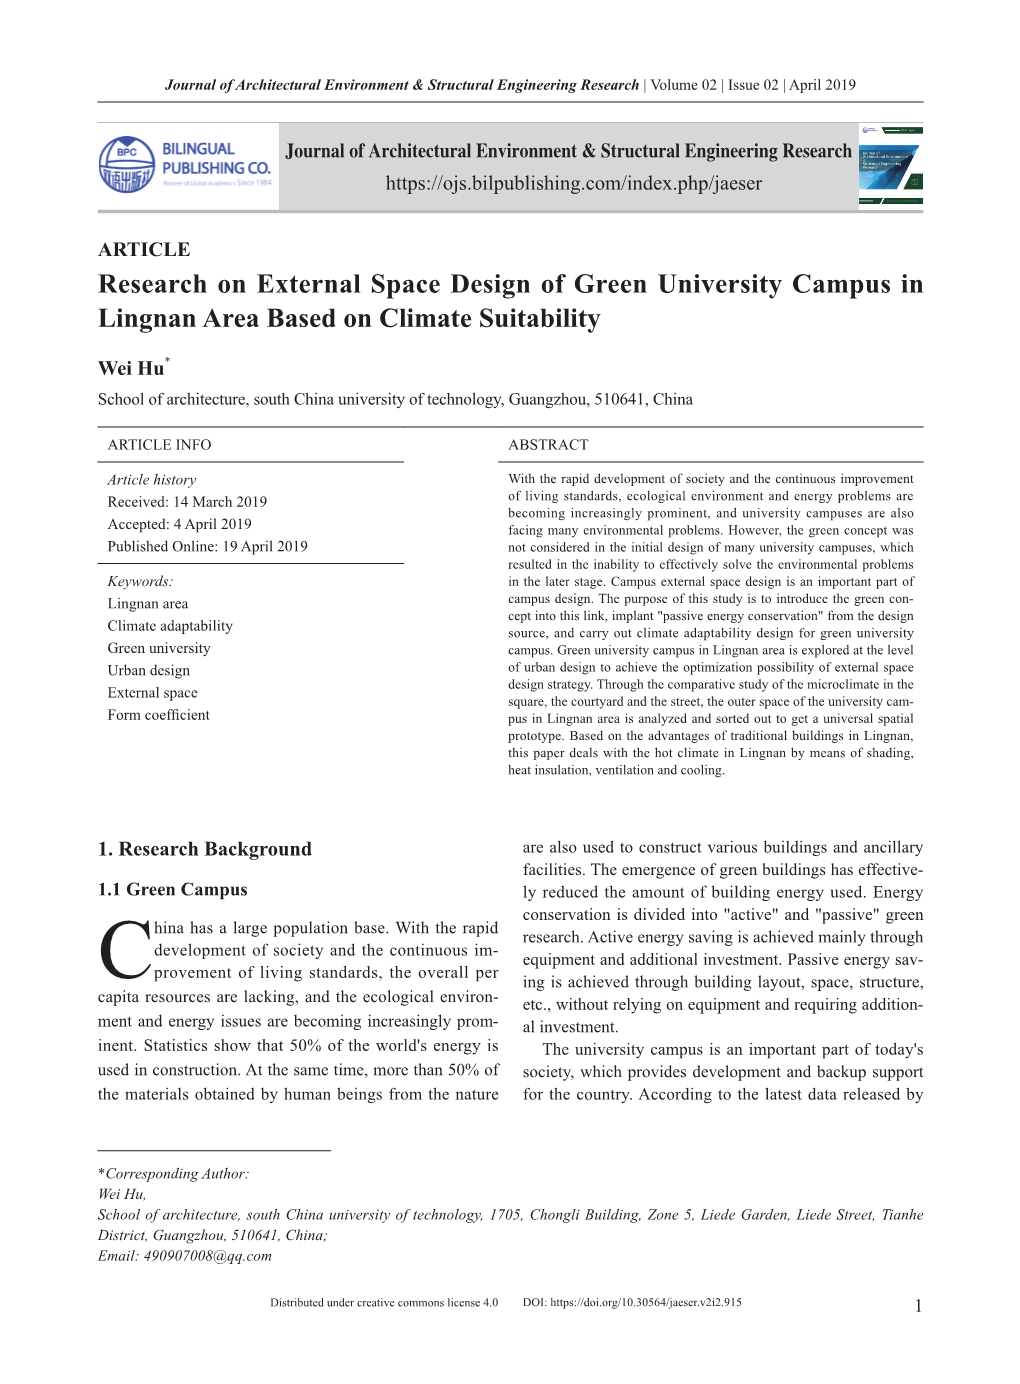 Research on External Space Design of Green University Campus in Lingnan Area Based on Climate Suitability